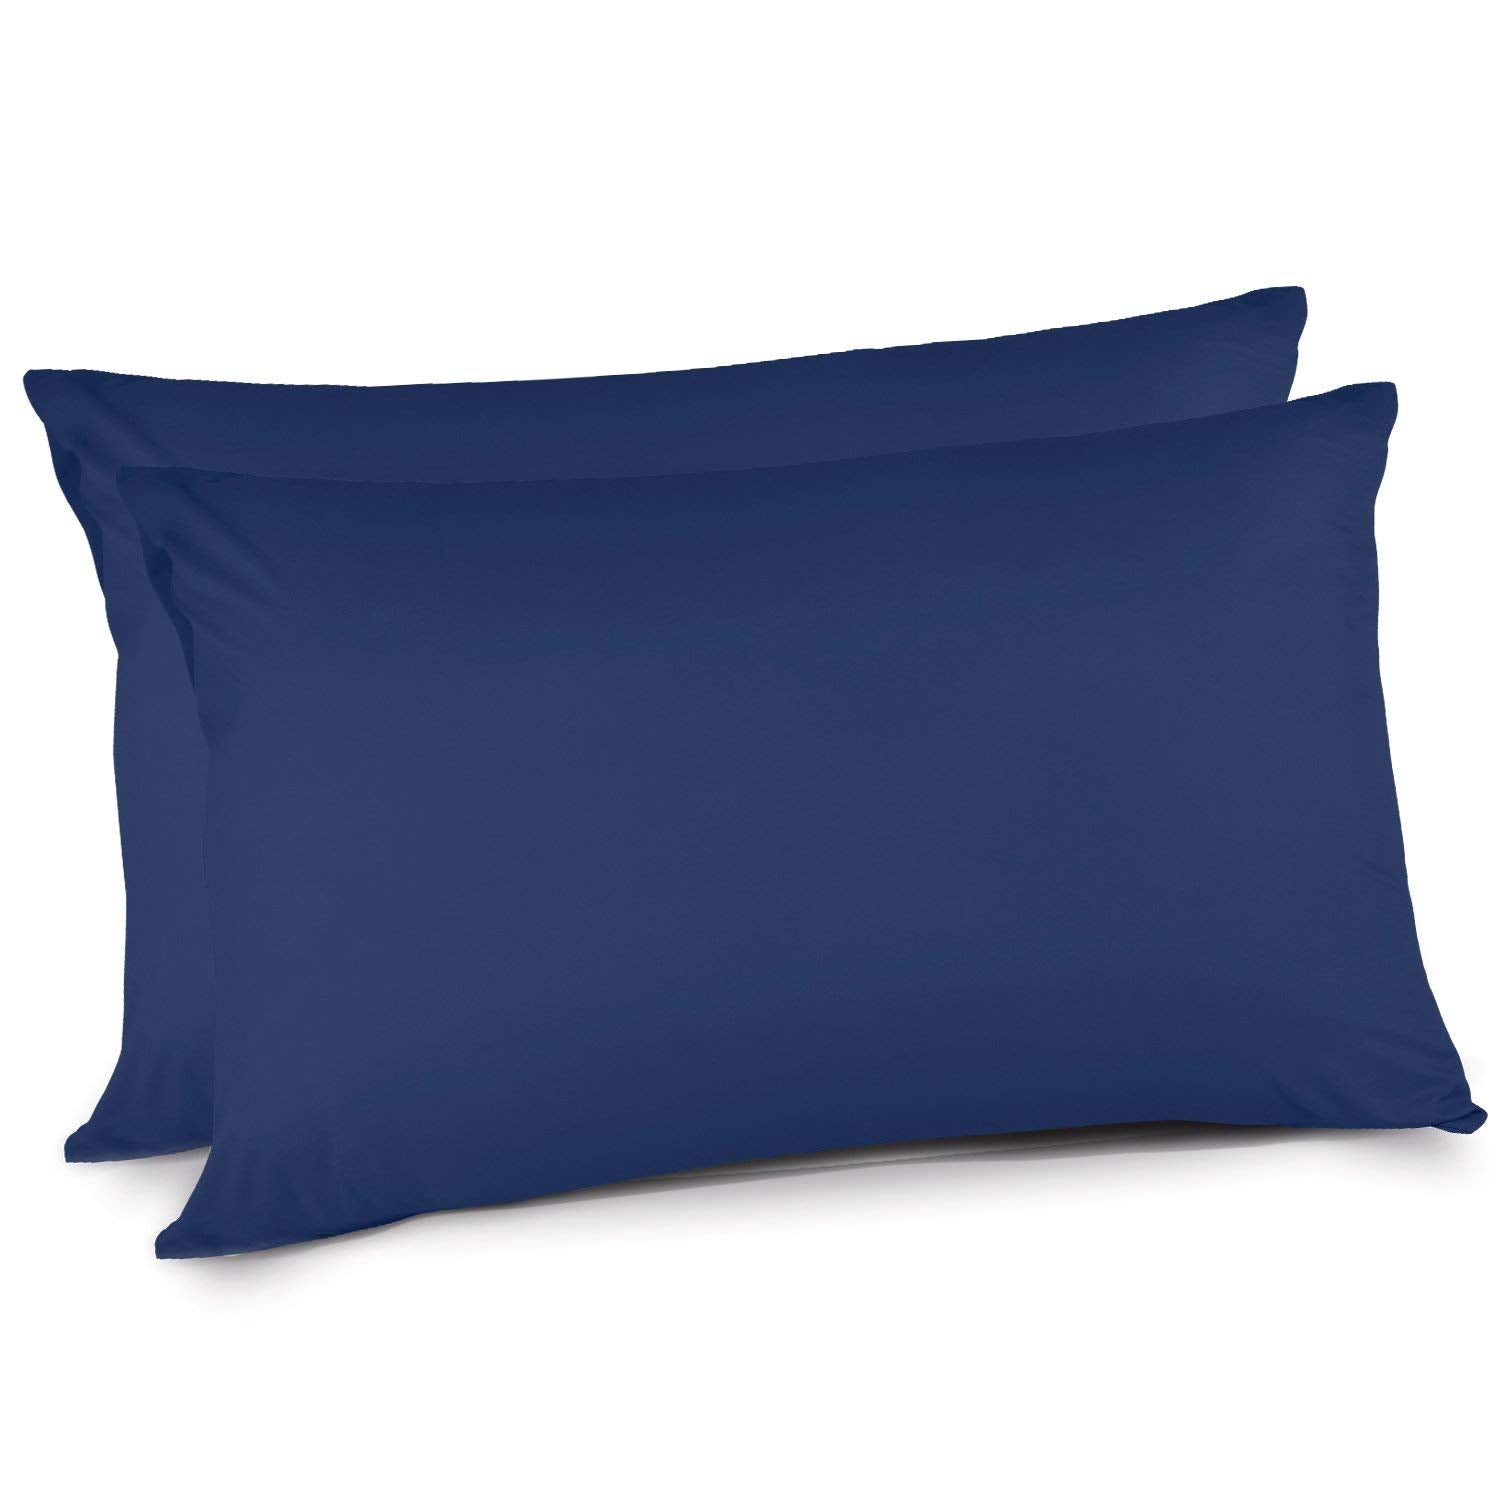 Adoric Pillow Cases Blue 2 Packs Queen Size, 50 X 75 CM Silky-soft 100% Brushed Microfiber Anti-static & Dust Mite Resistant